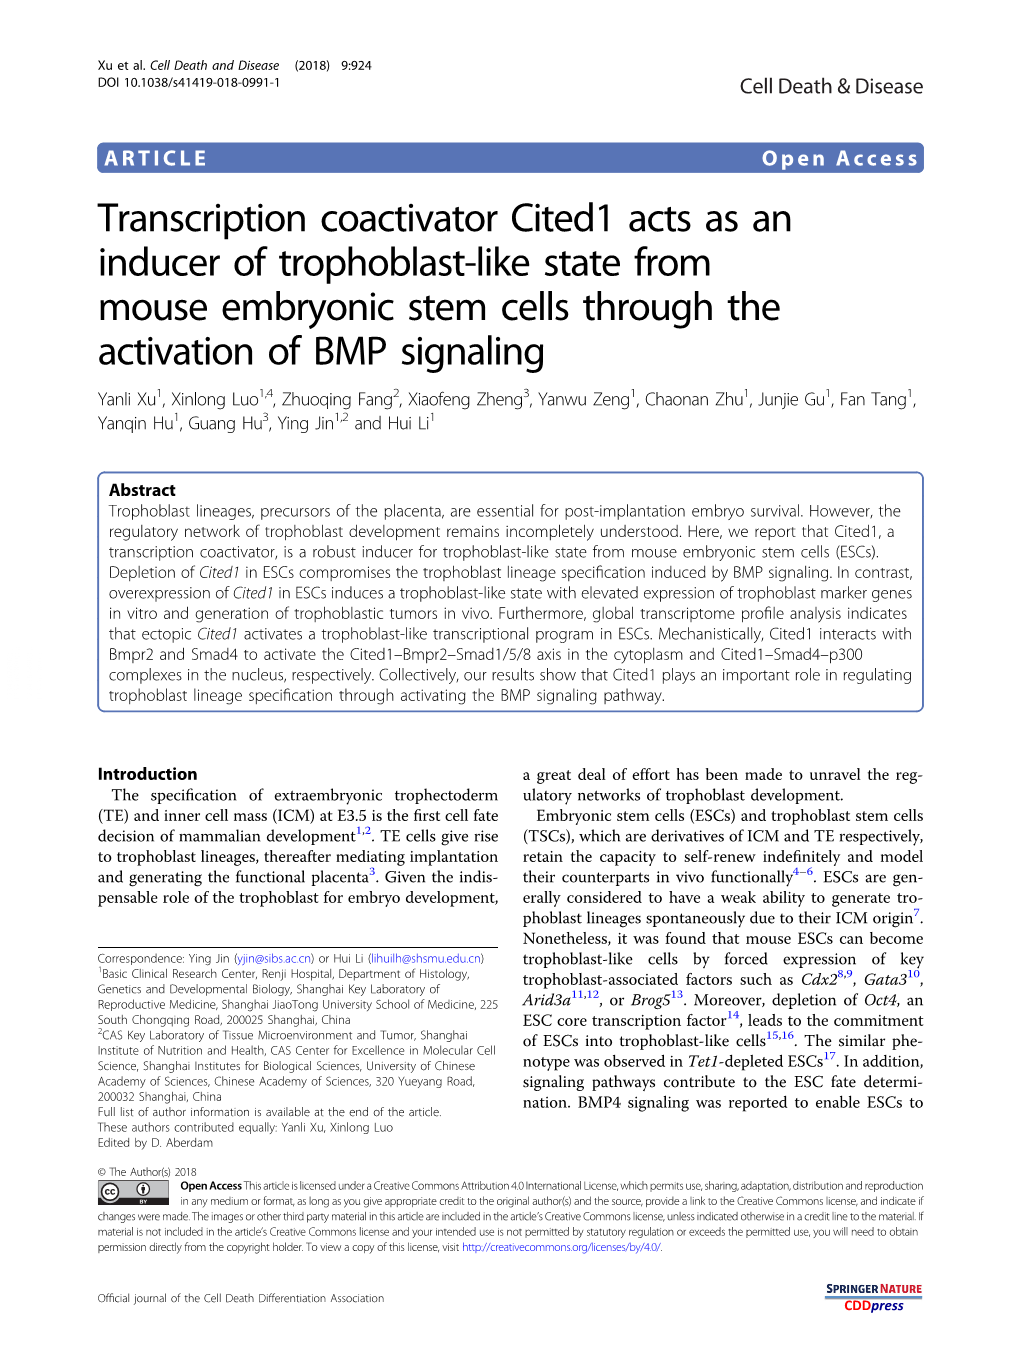 Transcription Coactivator Cited1 Acts As an Inducer of Trophoblast-Like